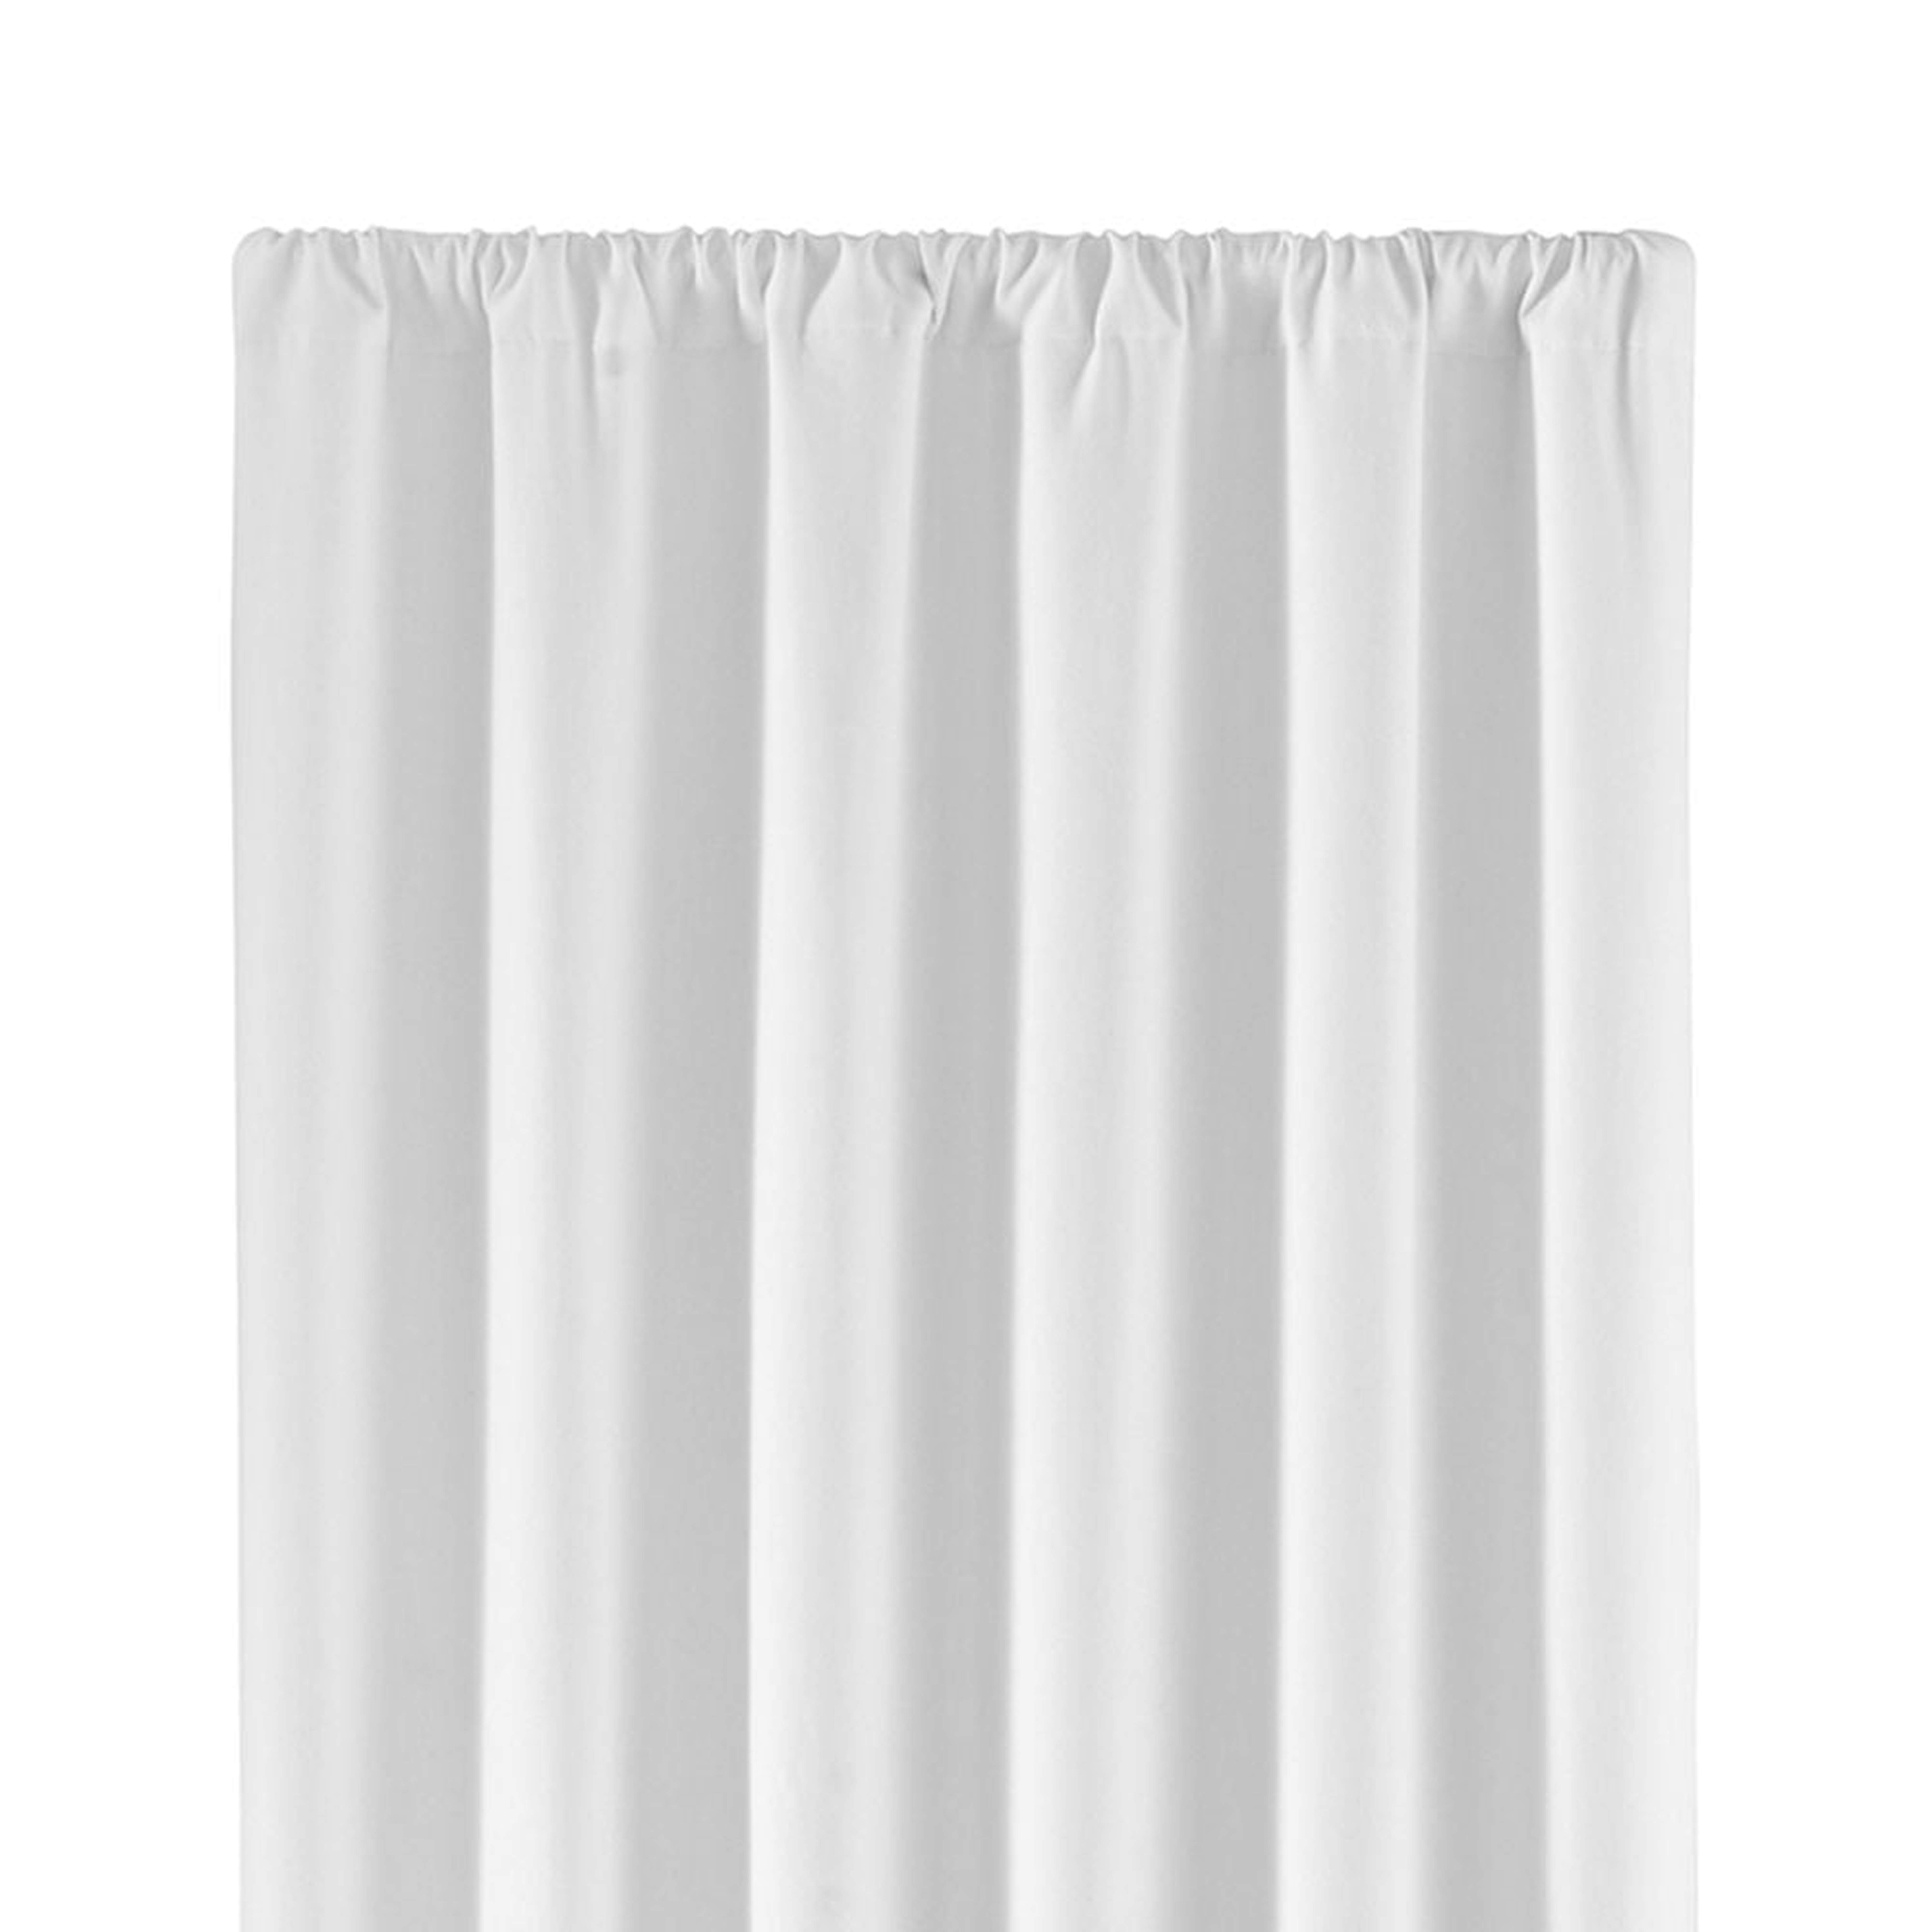 Wallace White Blackout Curtain Panel 52"x96" - Crate and Barrel